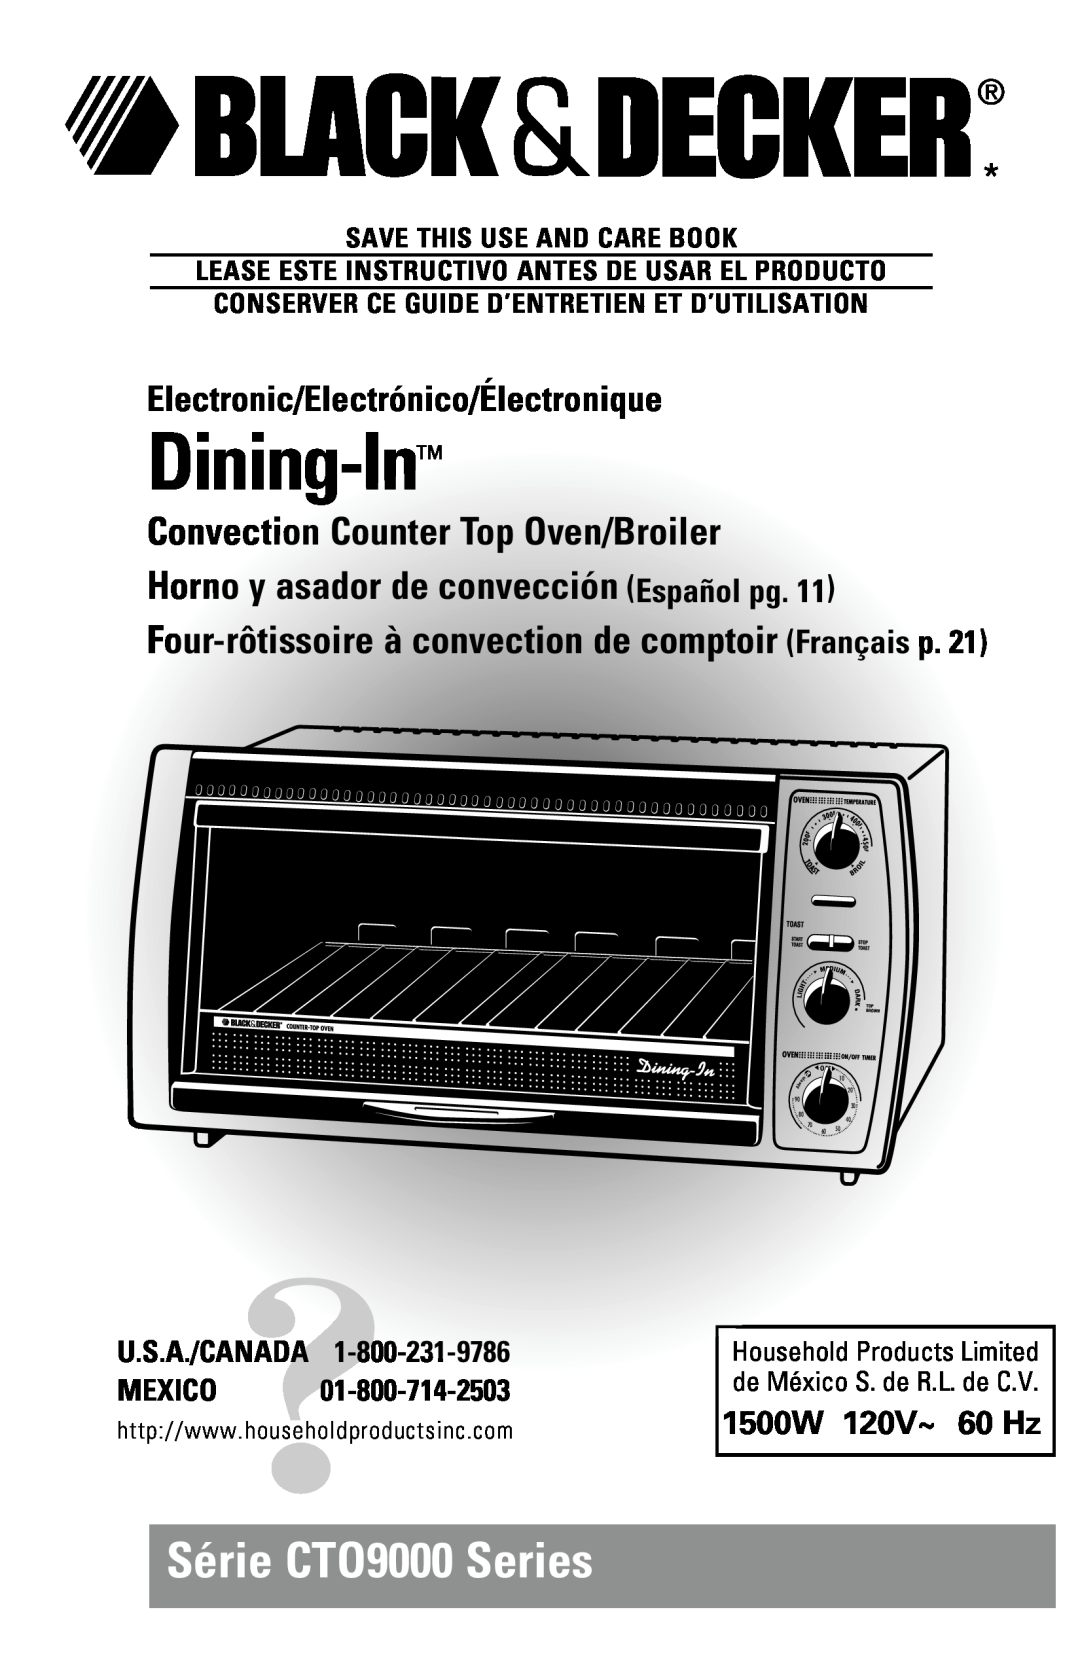 Black & Decker manual U.S.A./Canada Mexico, Save This Use And Care Book, Dining-In, Série CTO9000 Series, Al w 